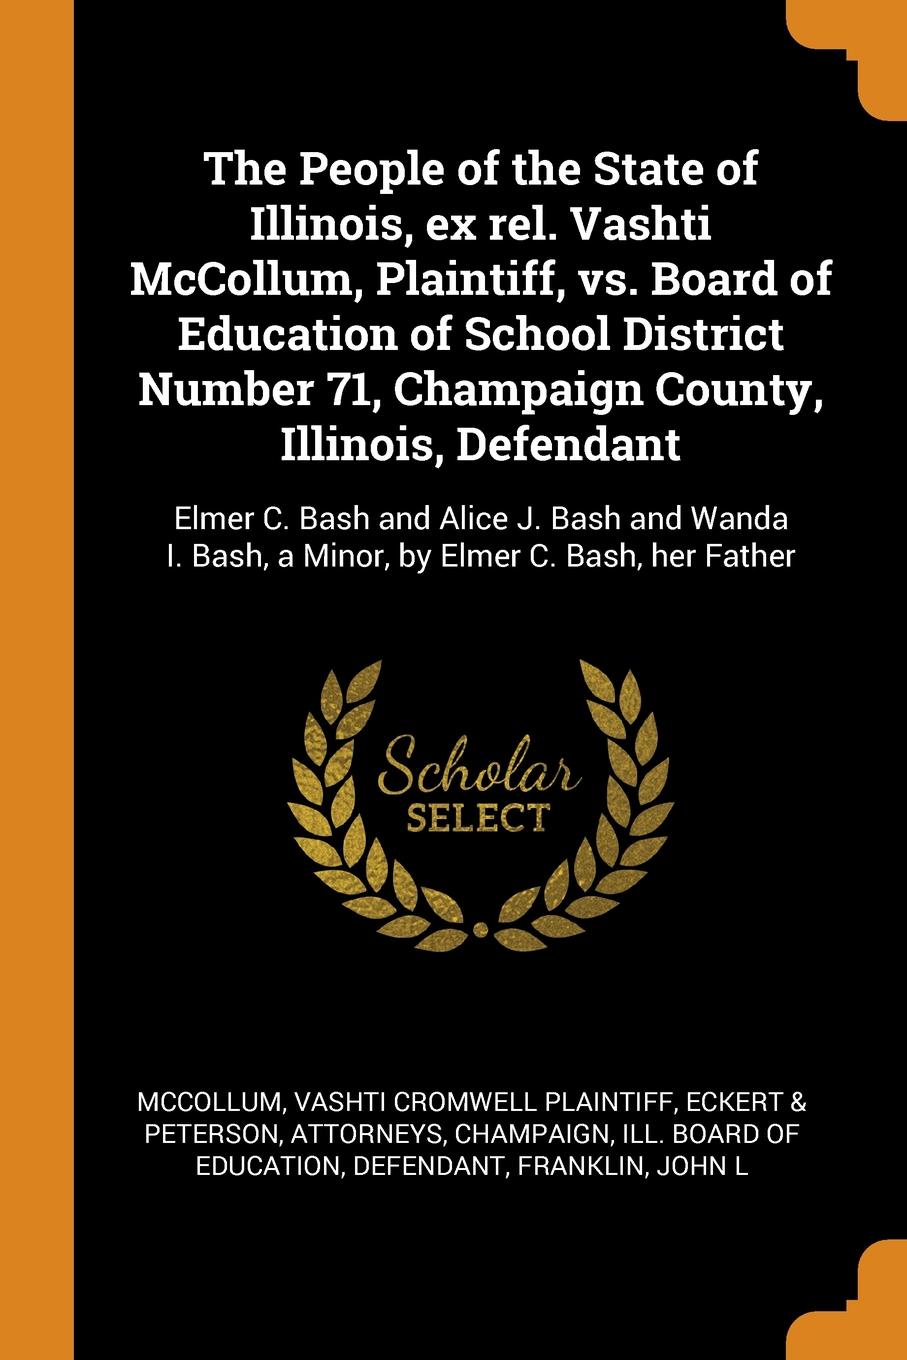 The People of the State of Illinois, ex rel. Vashti McCollum, Plaintiff, vs. Board of Education of School District Number 71, Champaign County, Illinois, Defendant. Elmer C. Bash and Alice J. Bash and Wanda I. Bash, a Minor, by Elmer C. Bash, her ...